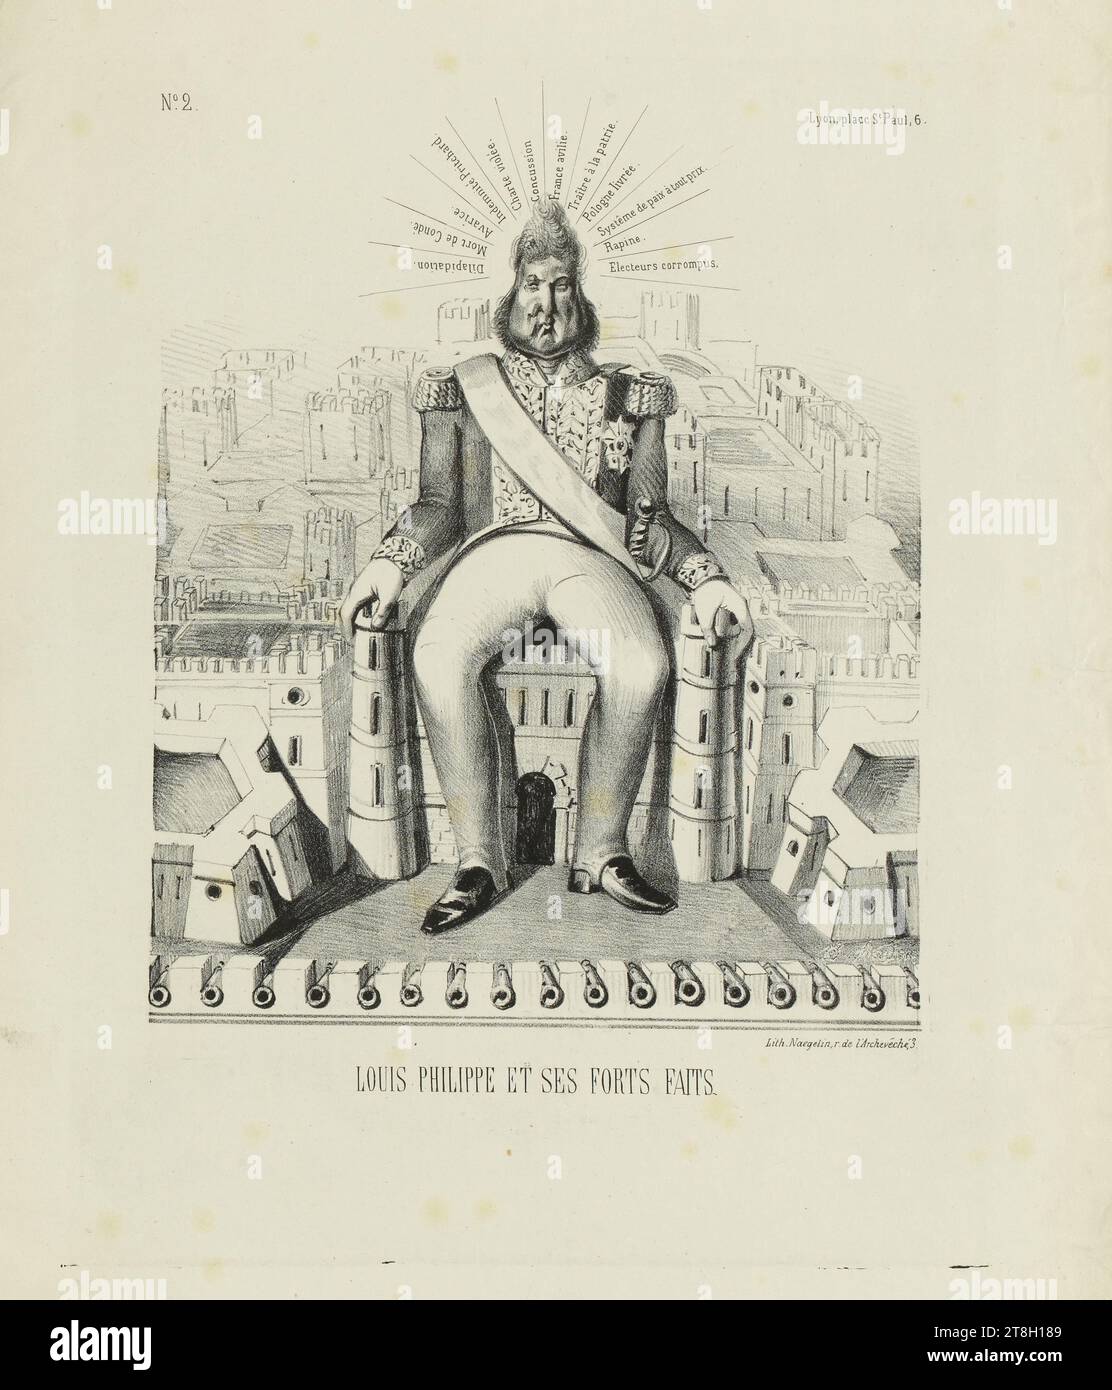 N°2, LOUIS PHILIPPE ET SES FORTS FAITS, Draftsman-lithographer, Naegelin, Jean Ulrich, Printer-lithographer, Circa 1848, Print, Graphic arts, Print, Lithography, Paris, Dimensions - Work: Height: 37.5 cm, Width: 30.8 cm, Dimensions - Assembly:, Height: 49 cm, Width: 32.5 cm Stock Photo